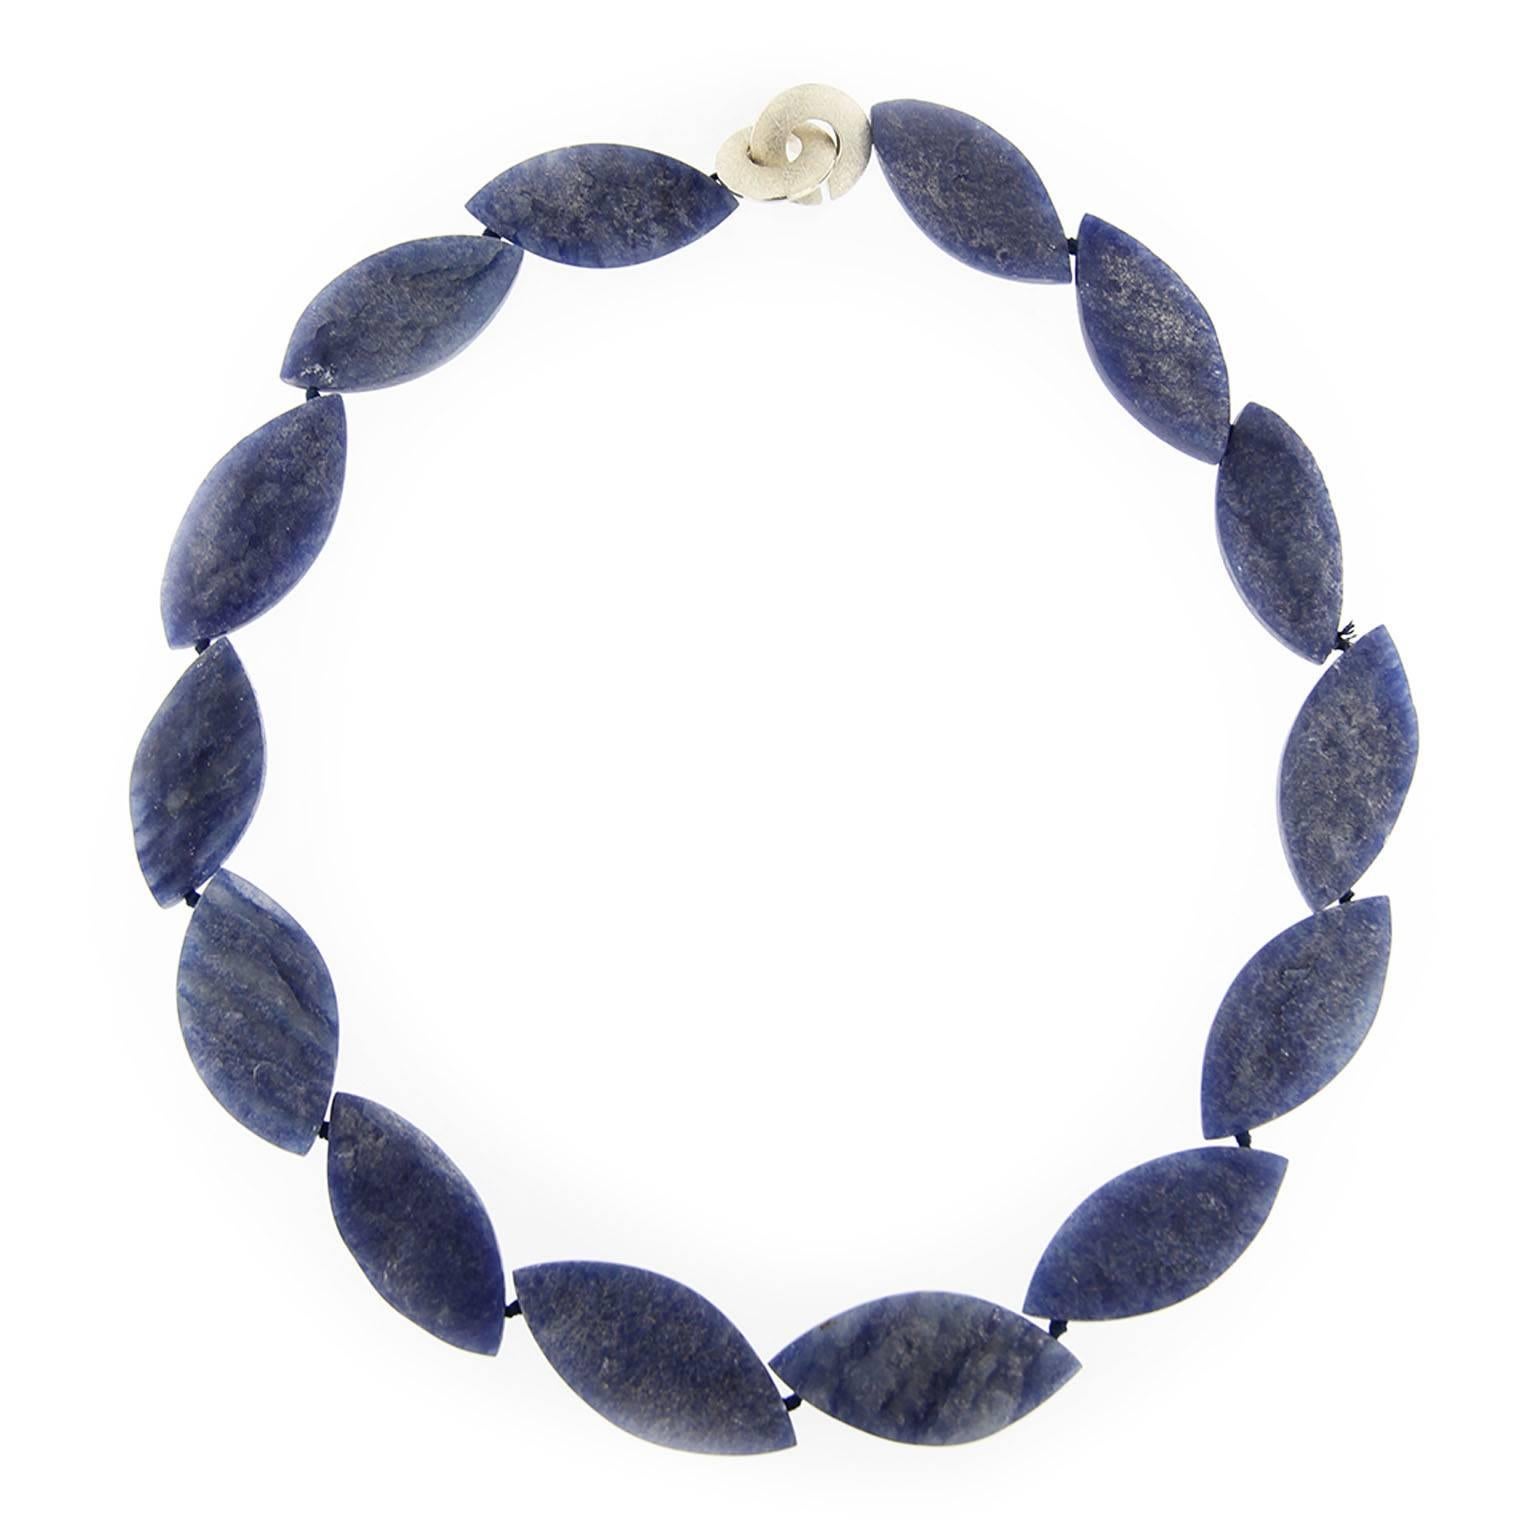 Jona design collection, Polished Navette Blue Quartz necklace with a brushed sterling silver clasp. Length: 19.68